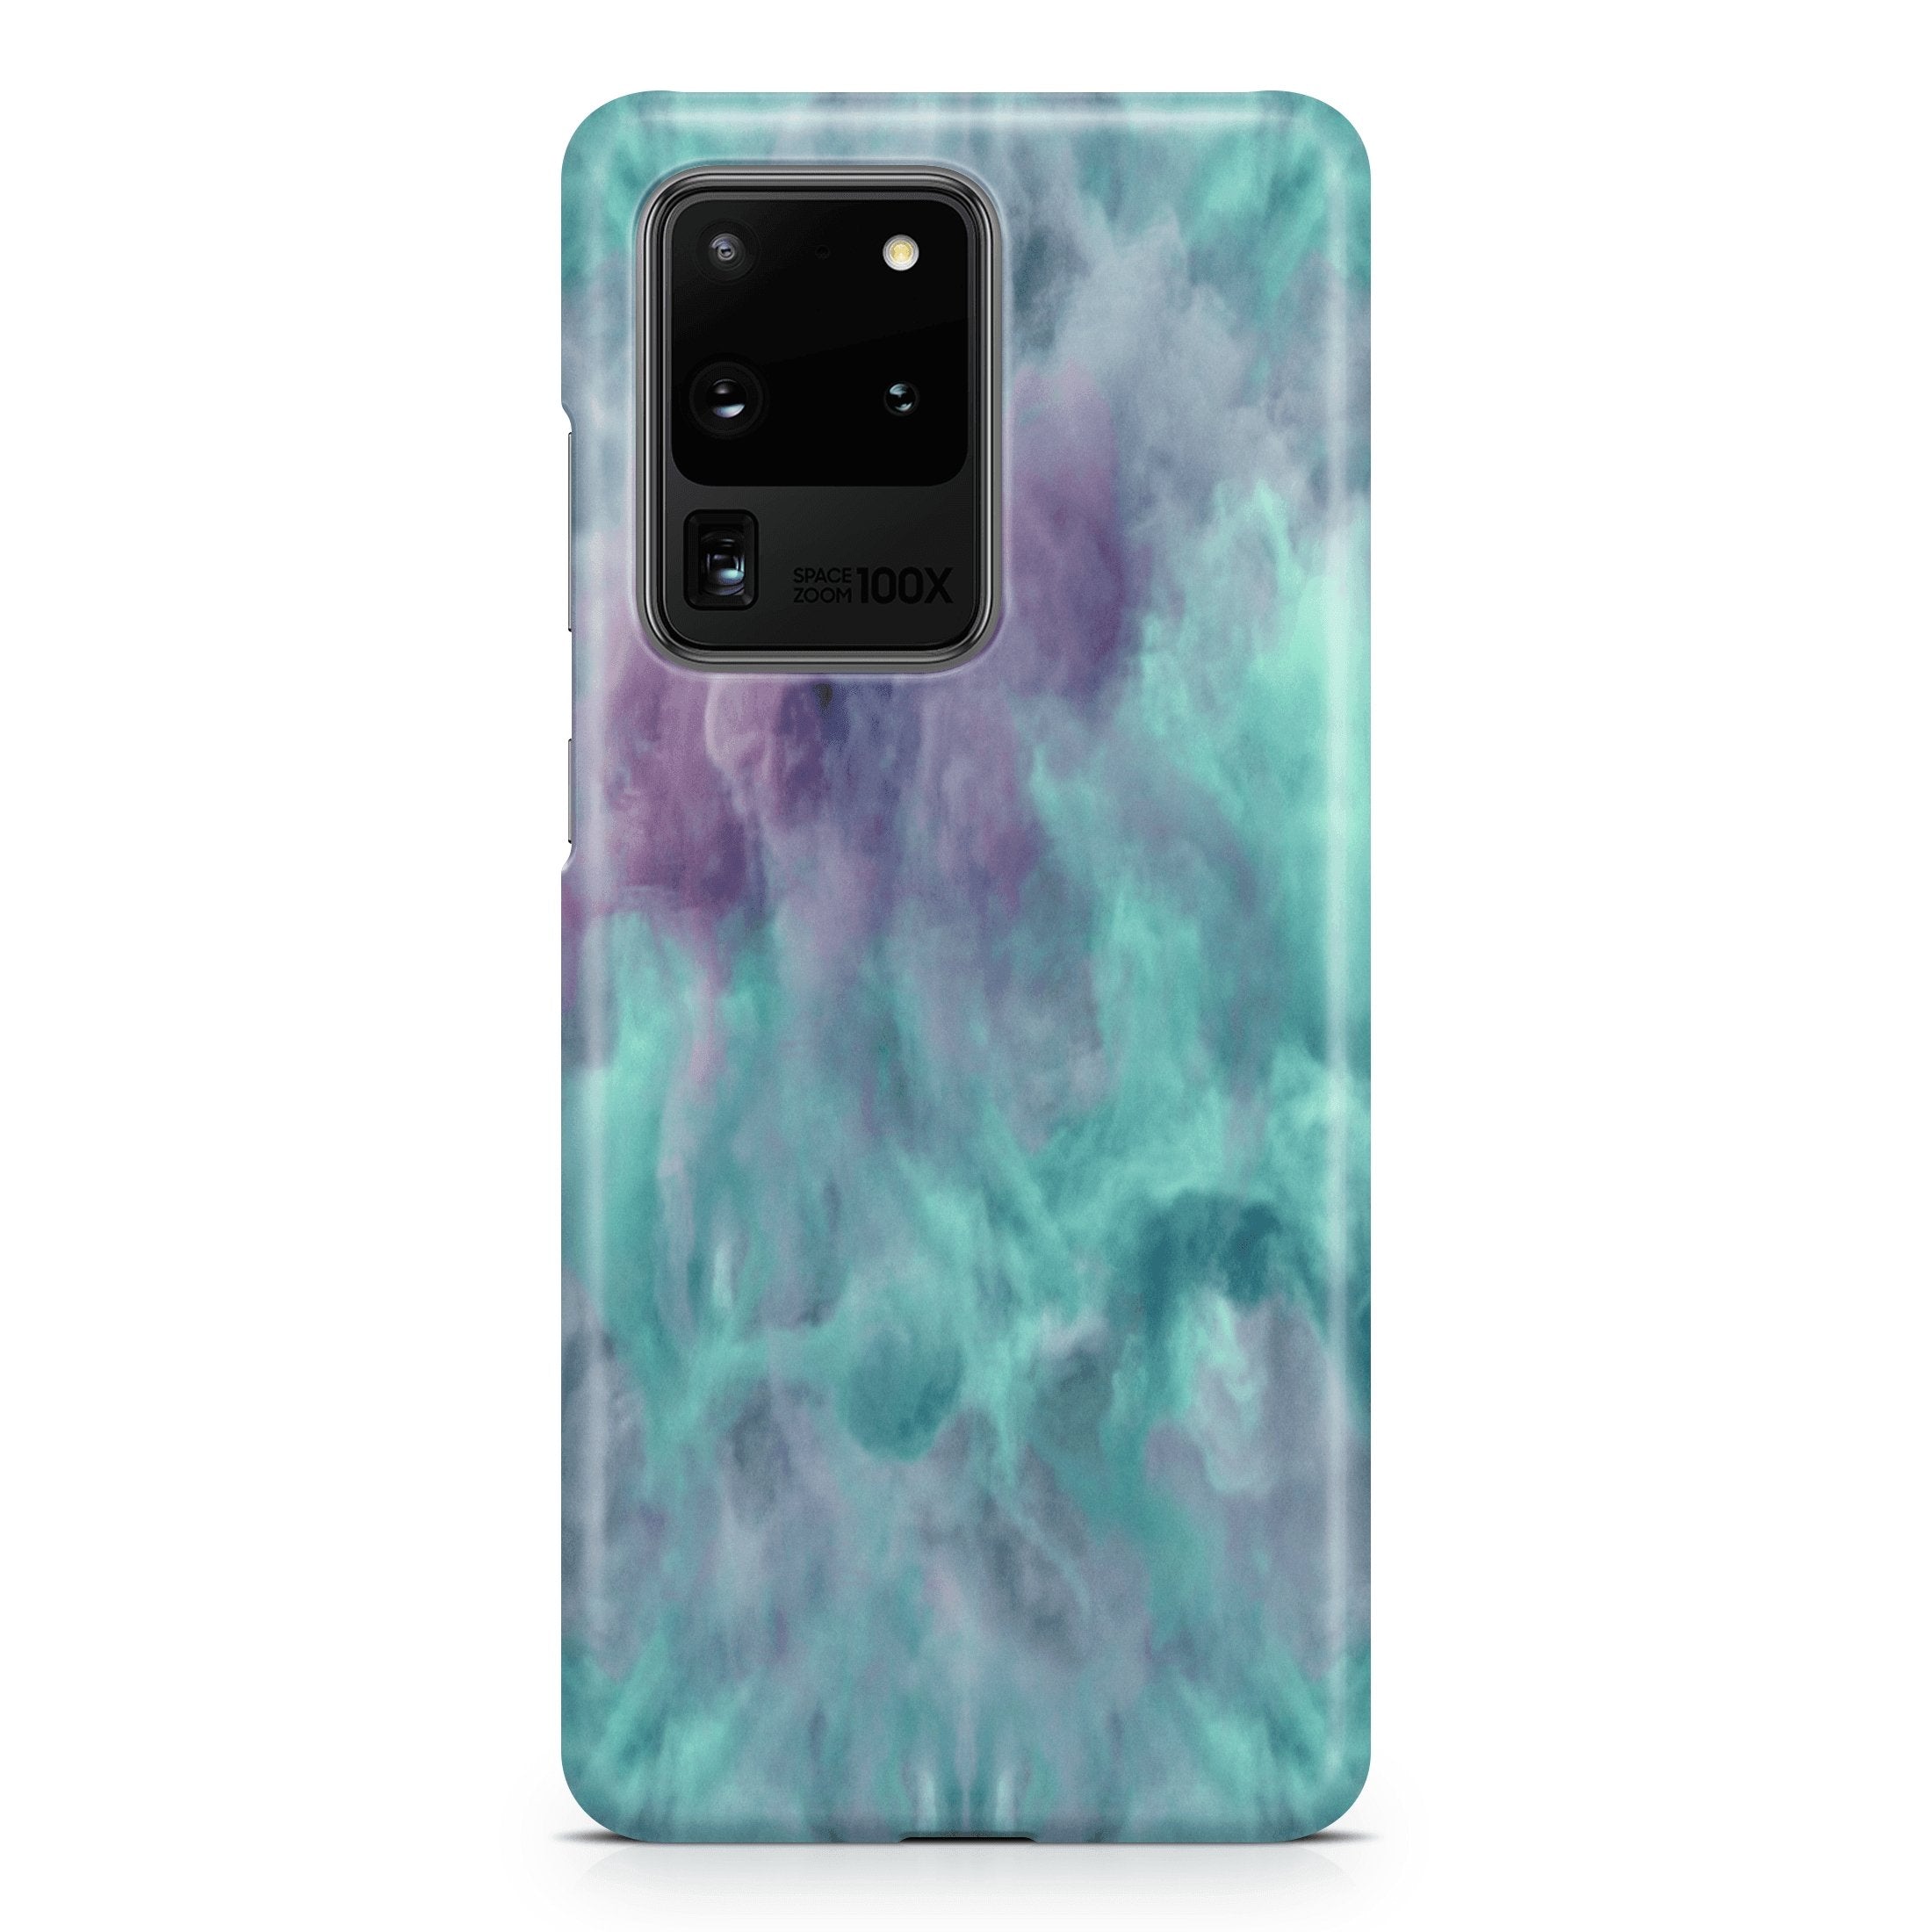 Turquoise Smoke Cloud - Samsung phone case designs by CaseSwagger